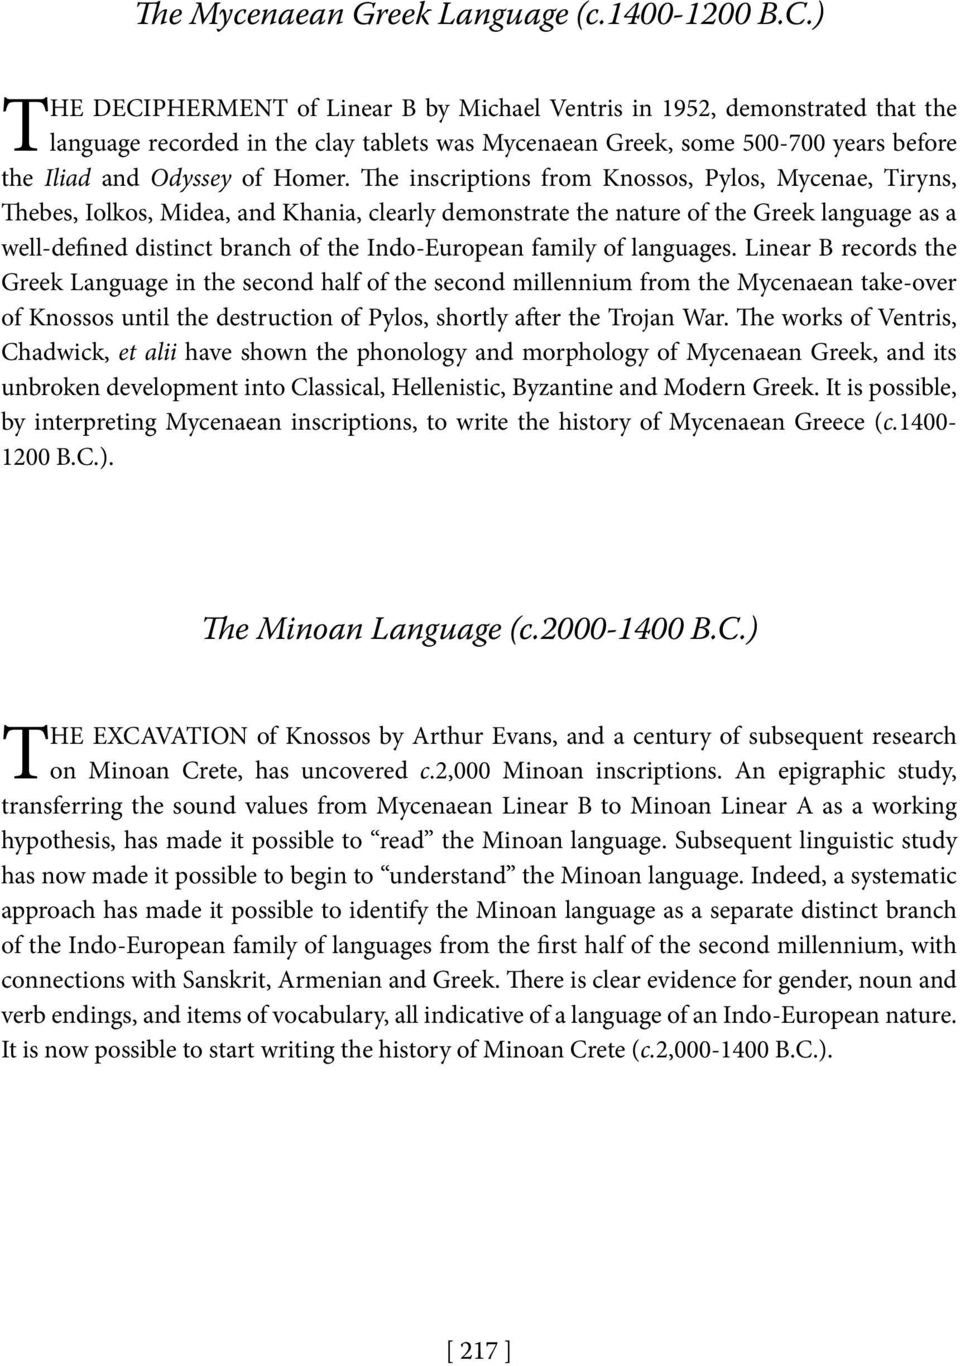 The inscriptions from Knossos, Pylos, Mycenae, Tiryns, Thebes, Iolkos, Midea, and Khania, clearly demonstrate the nature of the Greek language as a well-defined distinct branch of the Indo-European